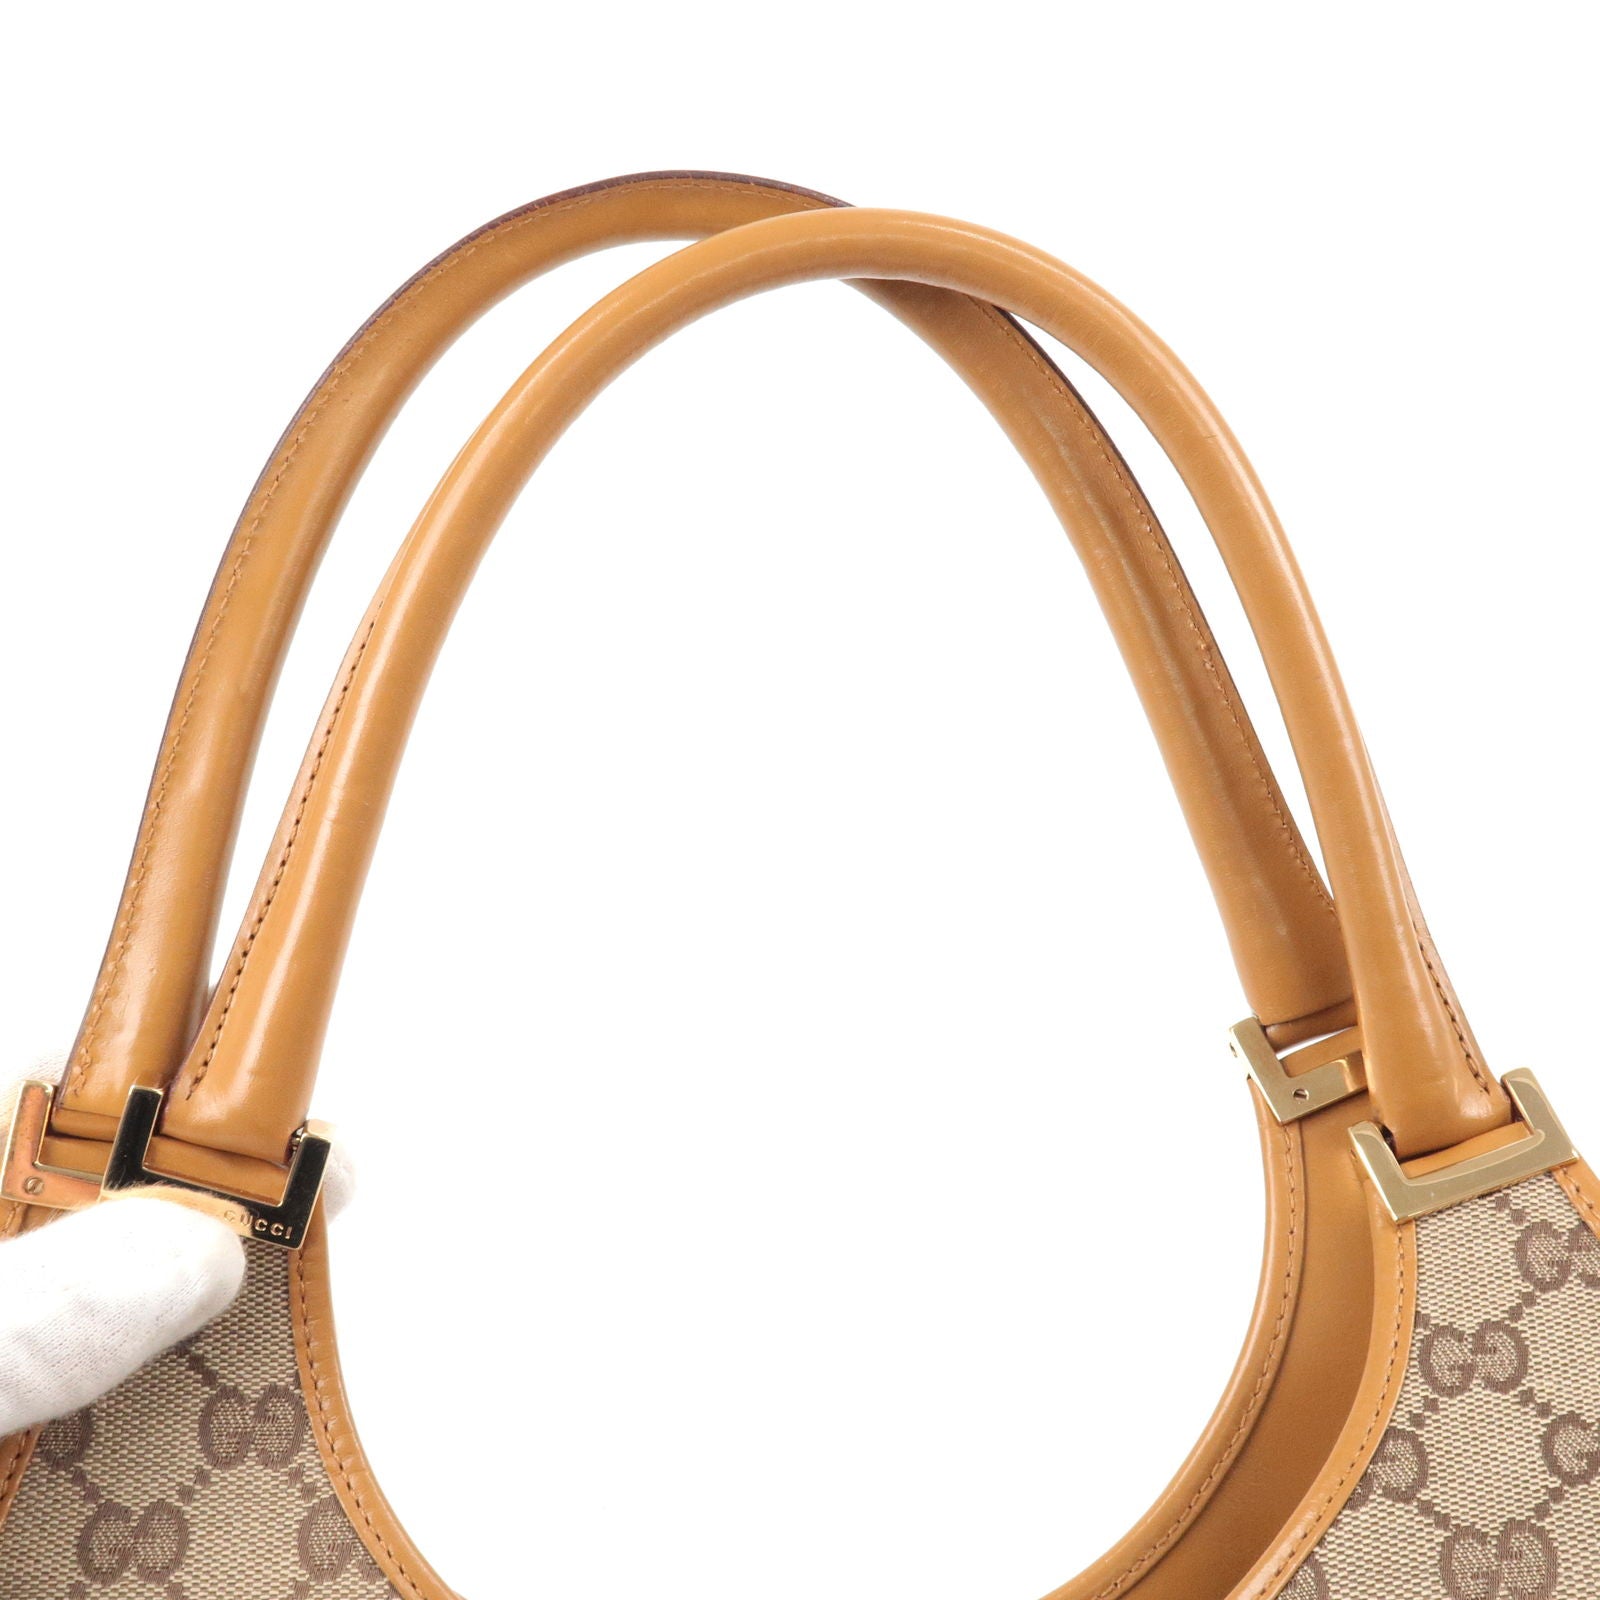 Gucci Beige/Brown GG Canvas and Leather Charmy Hobo Gucci